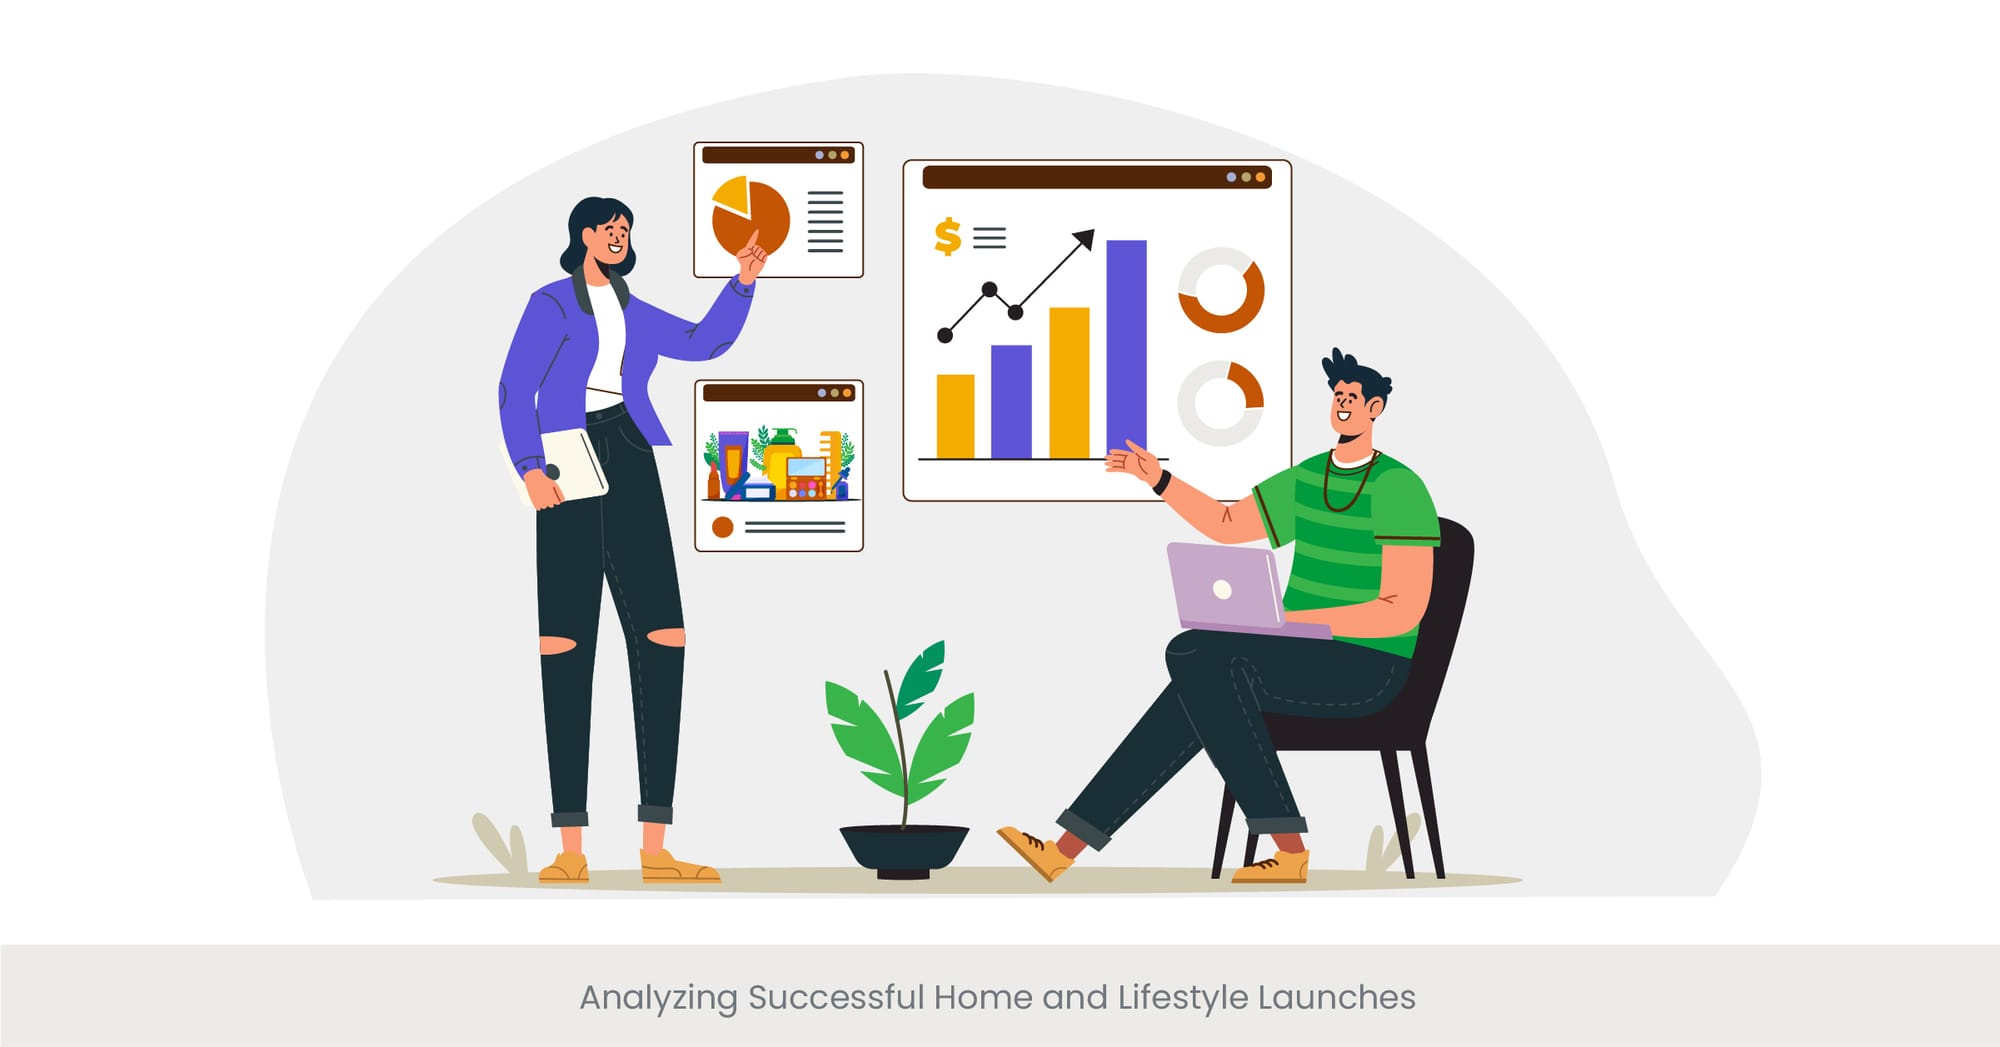 Analyzing Successful Home and Lifestyle Launches